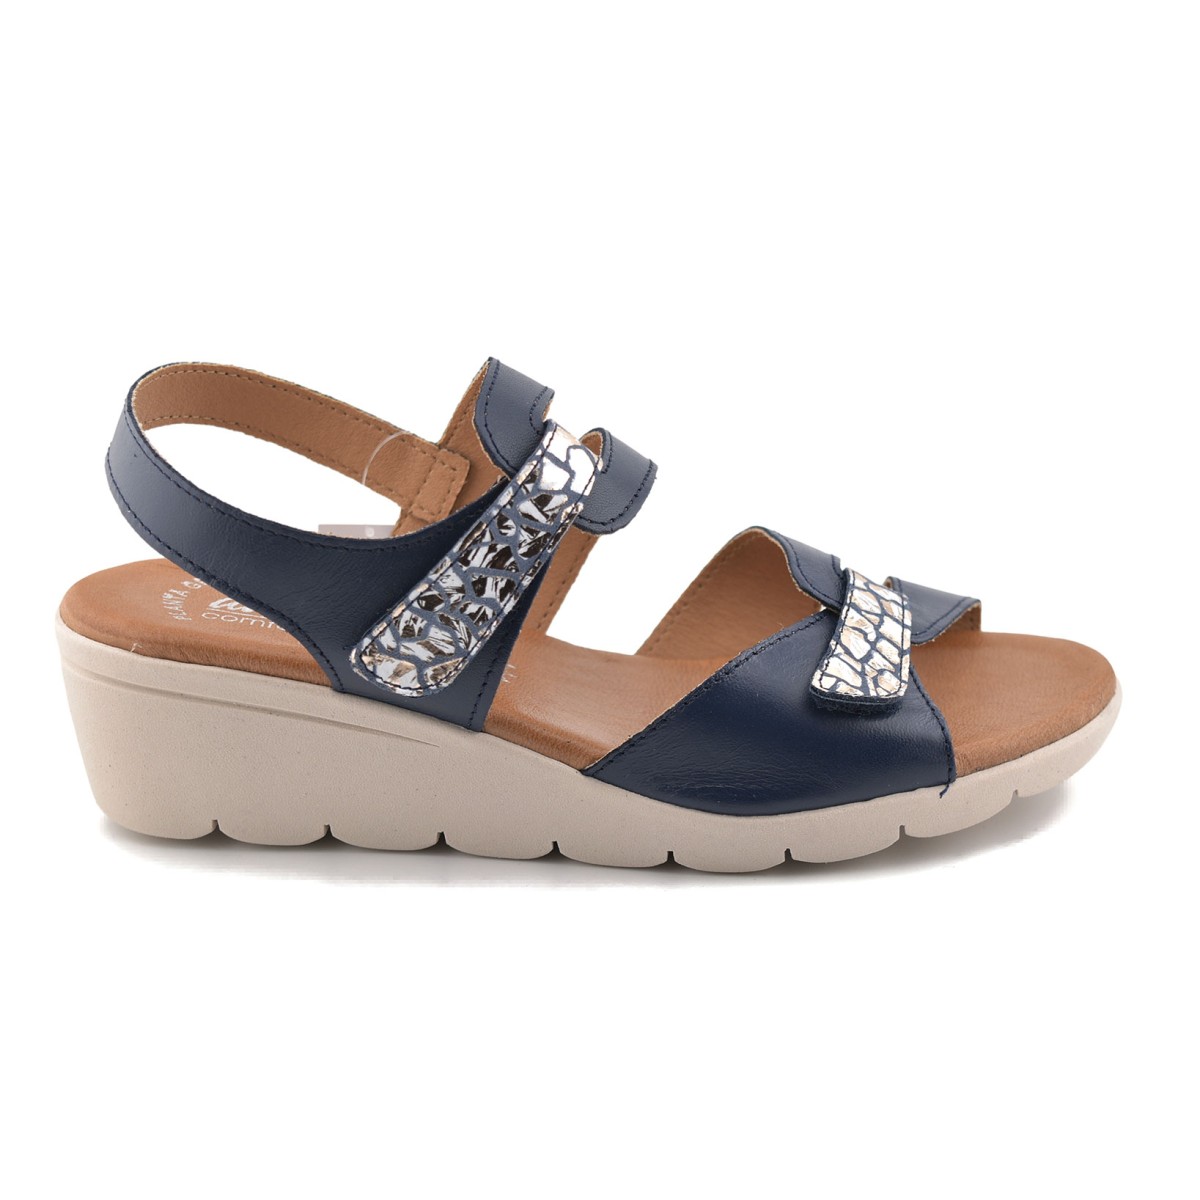 Blue leather sandals with wedge by Amelie